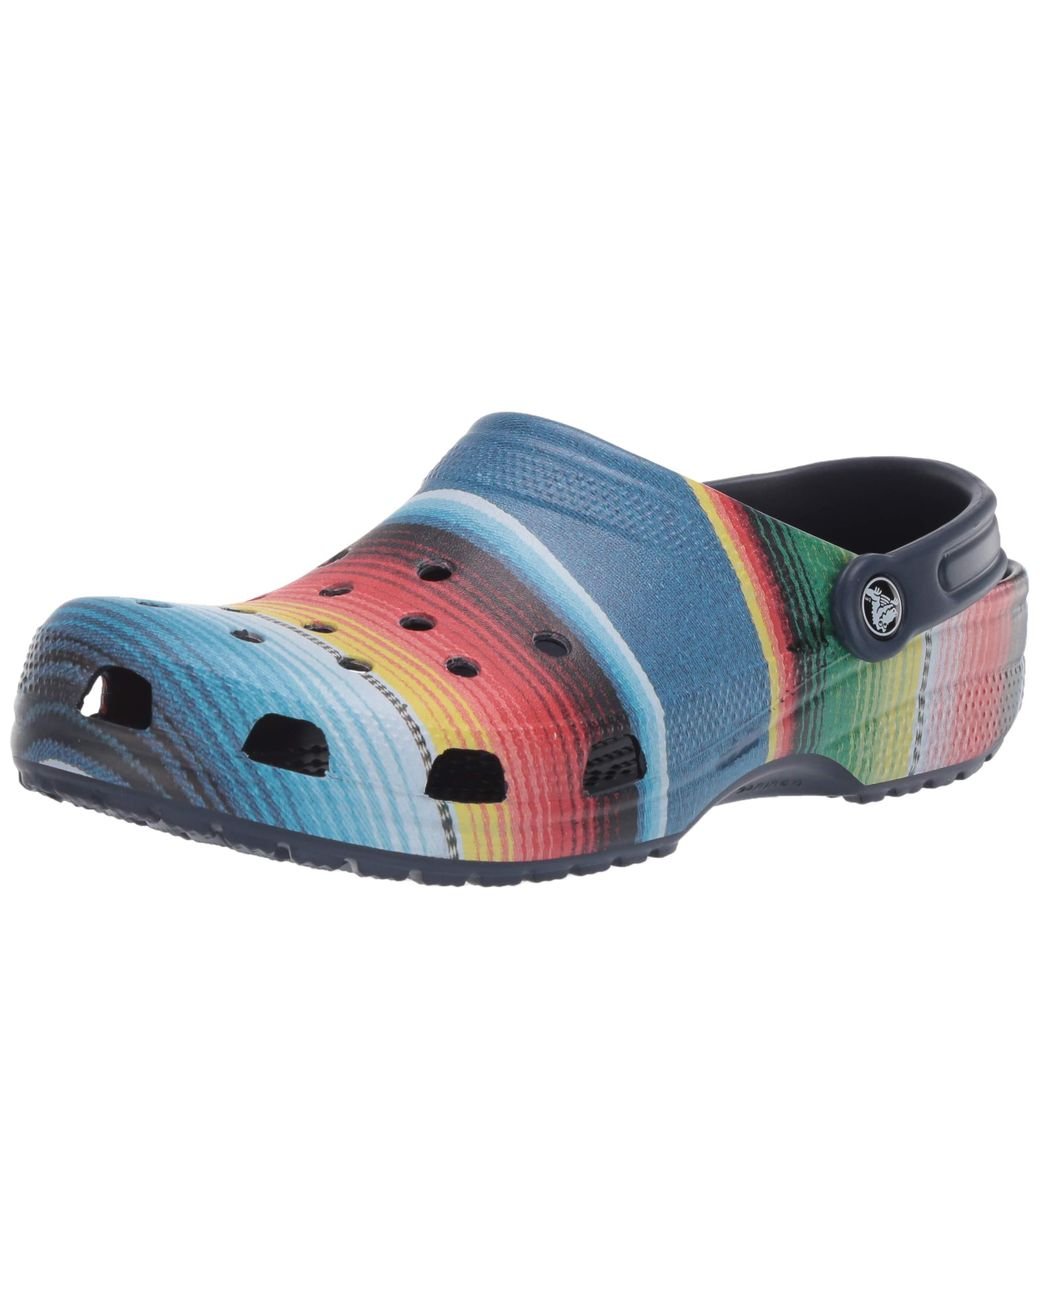 Crocs™ And Classic Striped Clog|casual Slip On Water Shoe in Blue | Lyst